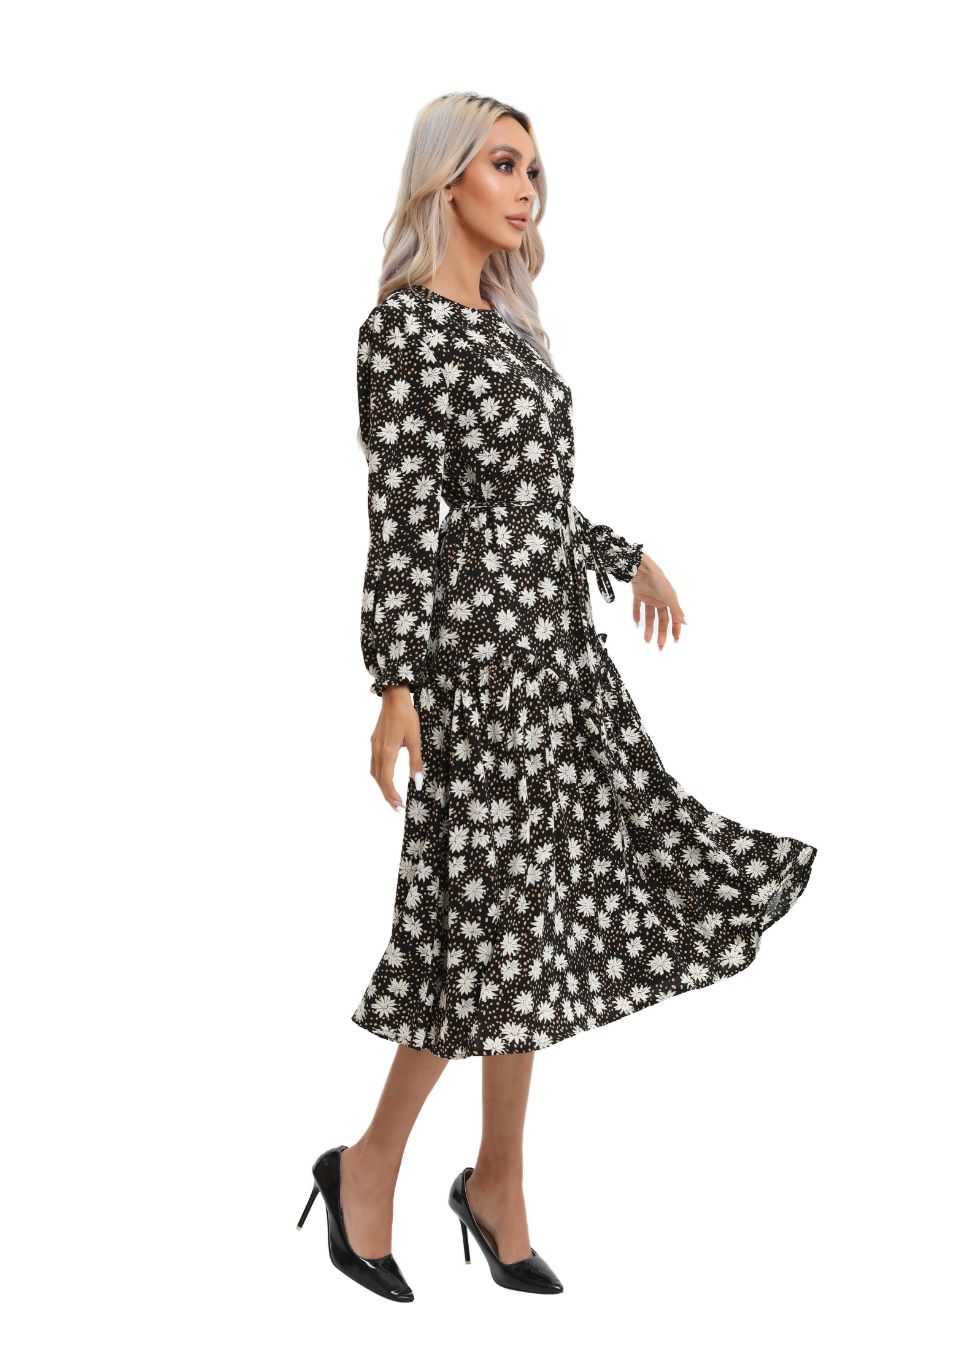 Modest Floral Midi Dress with Light Front Tie - seilerlanguageservices